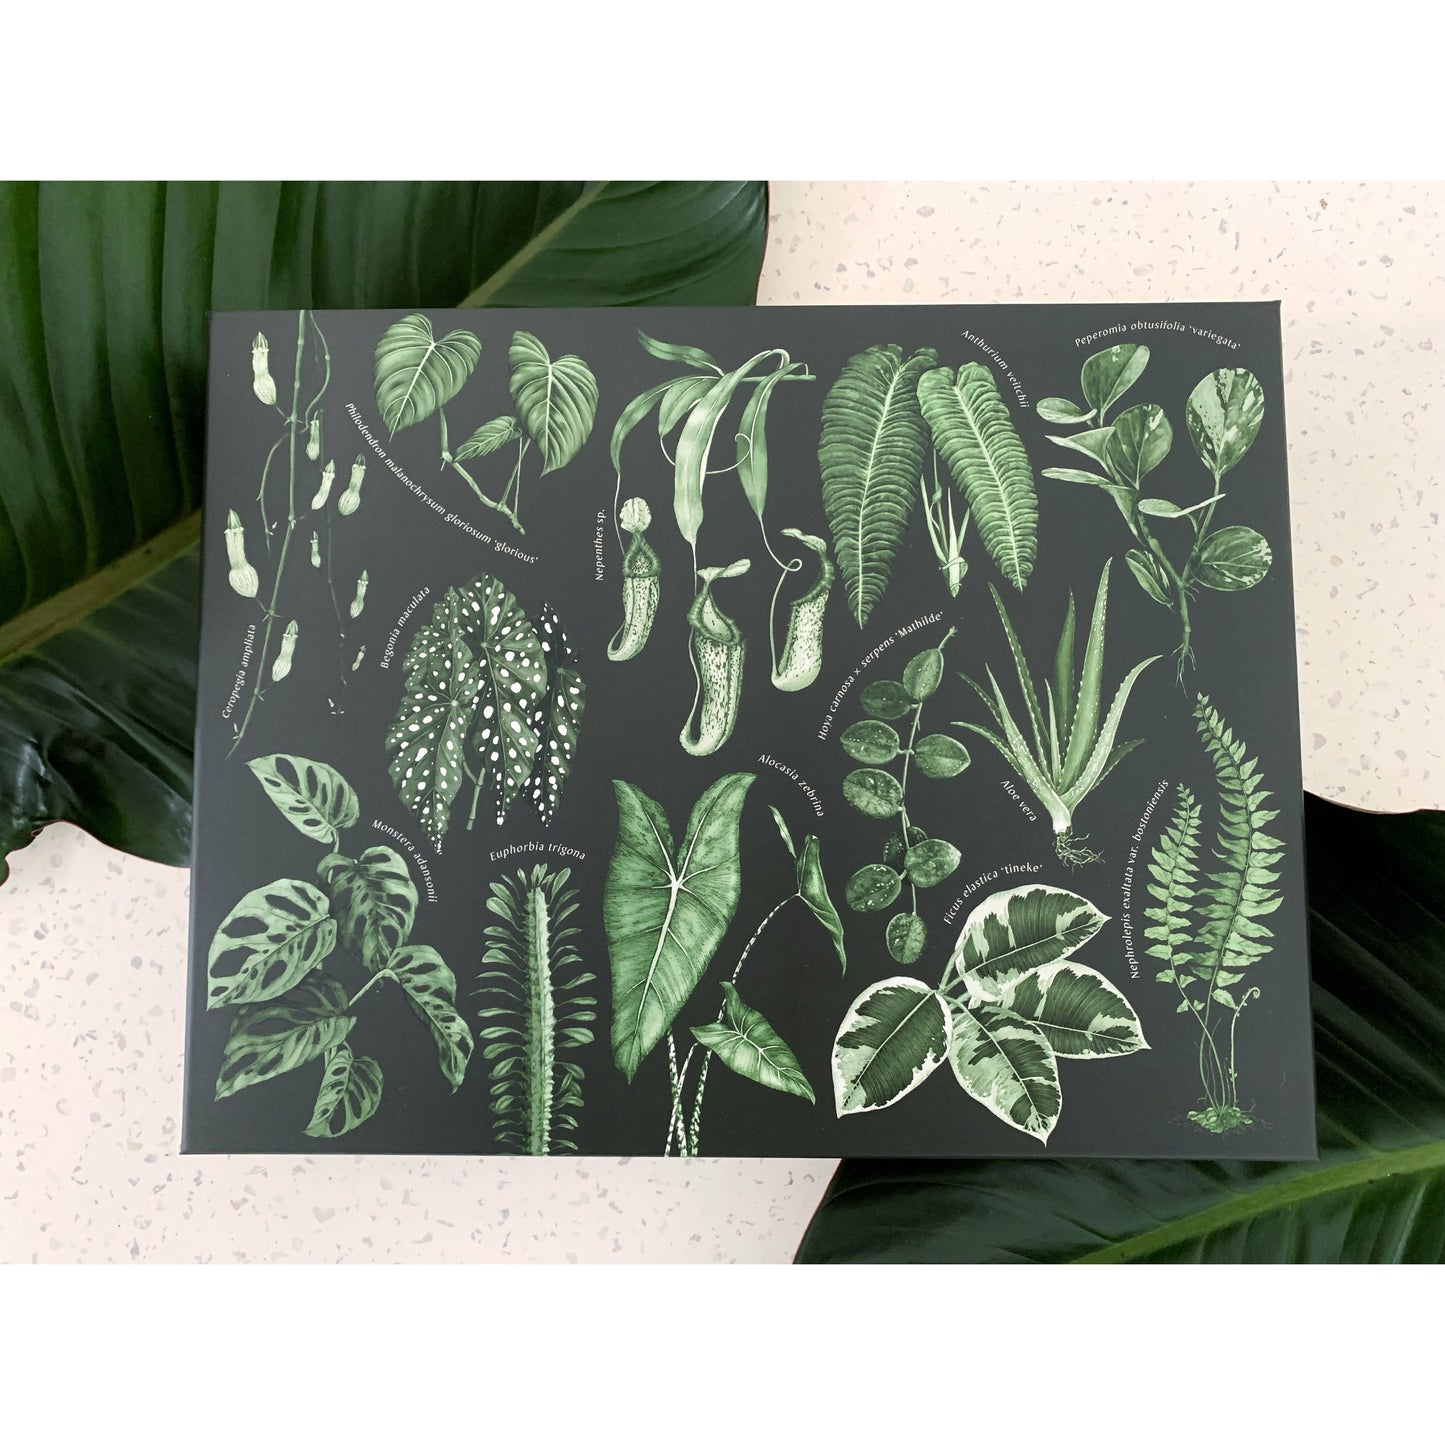 The Houseplant Collection Puzzle